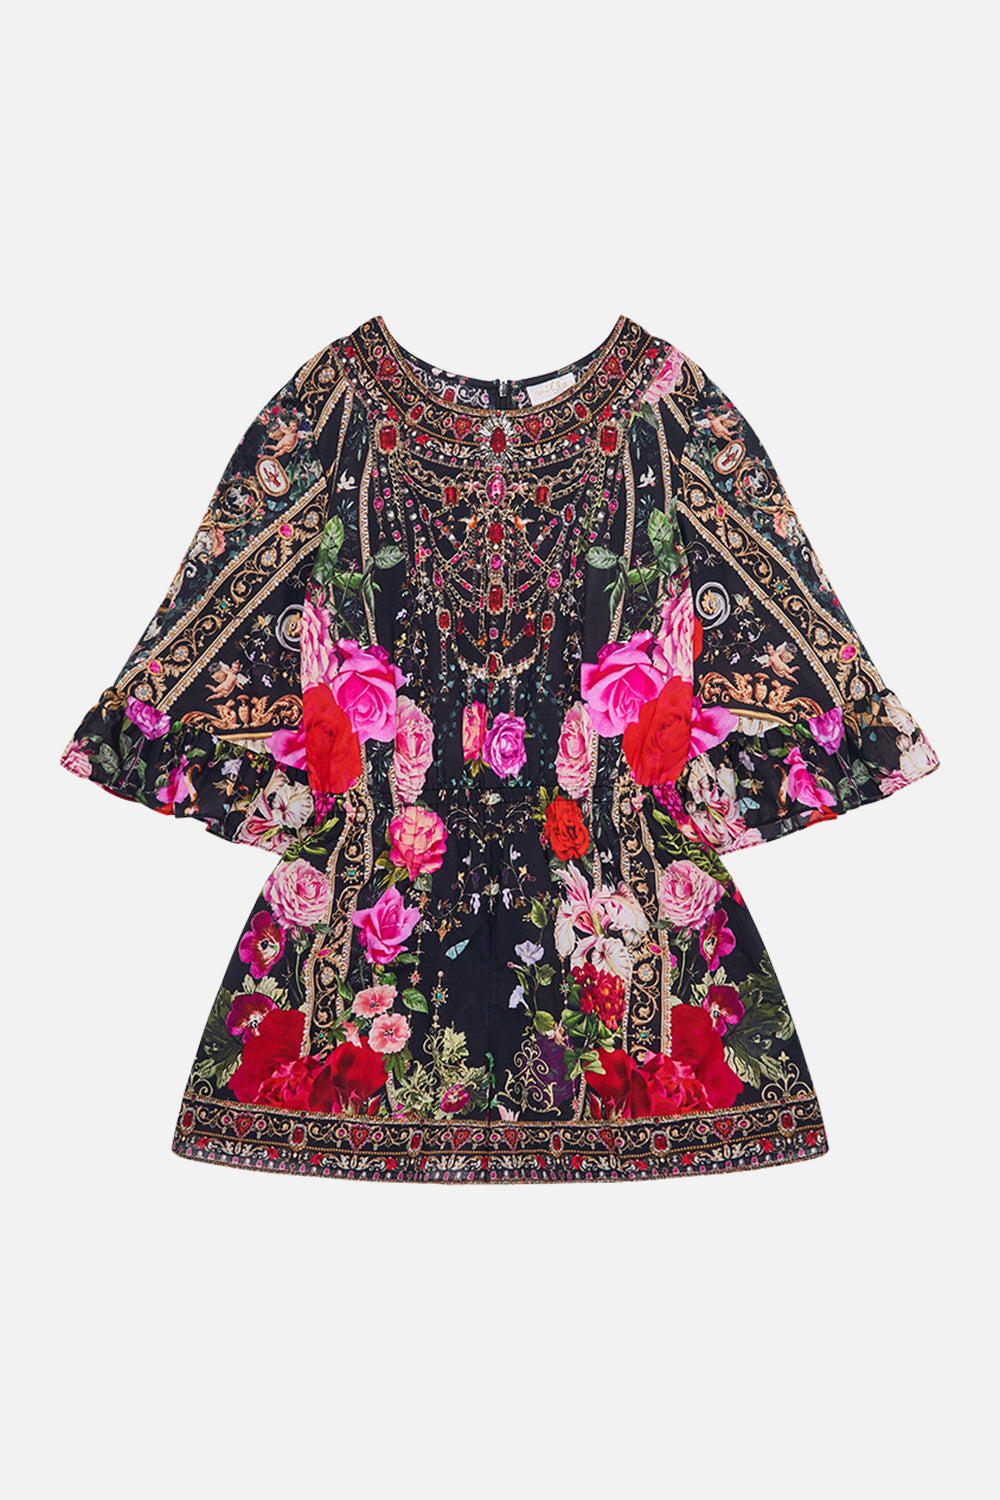 Milla by CAMILLA girls floral playsuit in Reservation For Love print